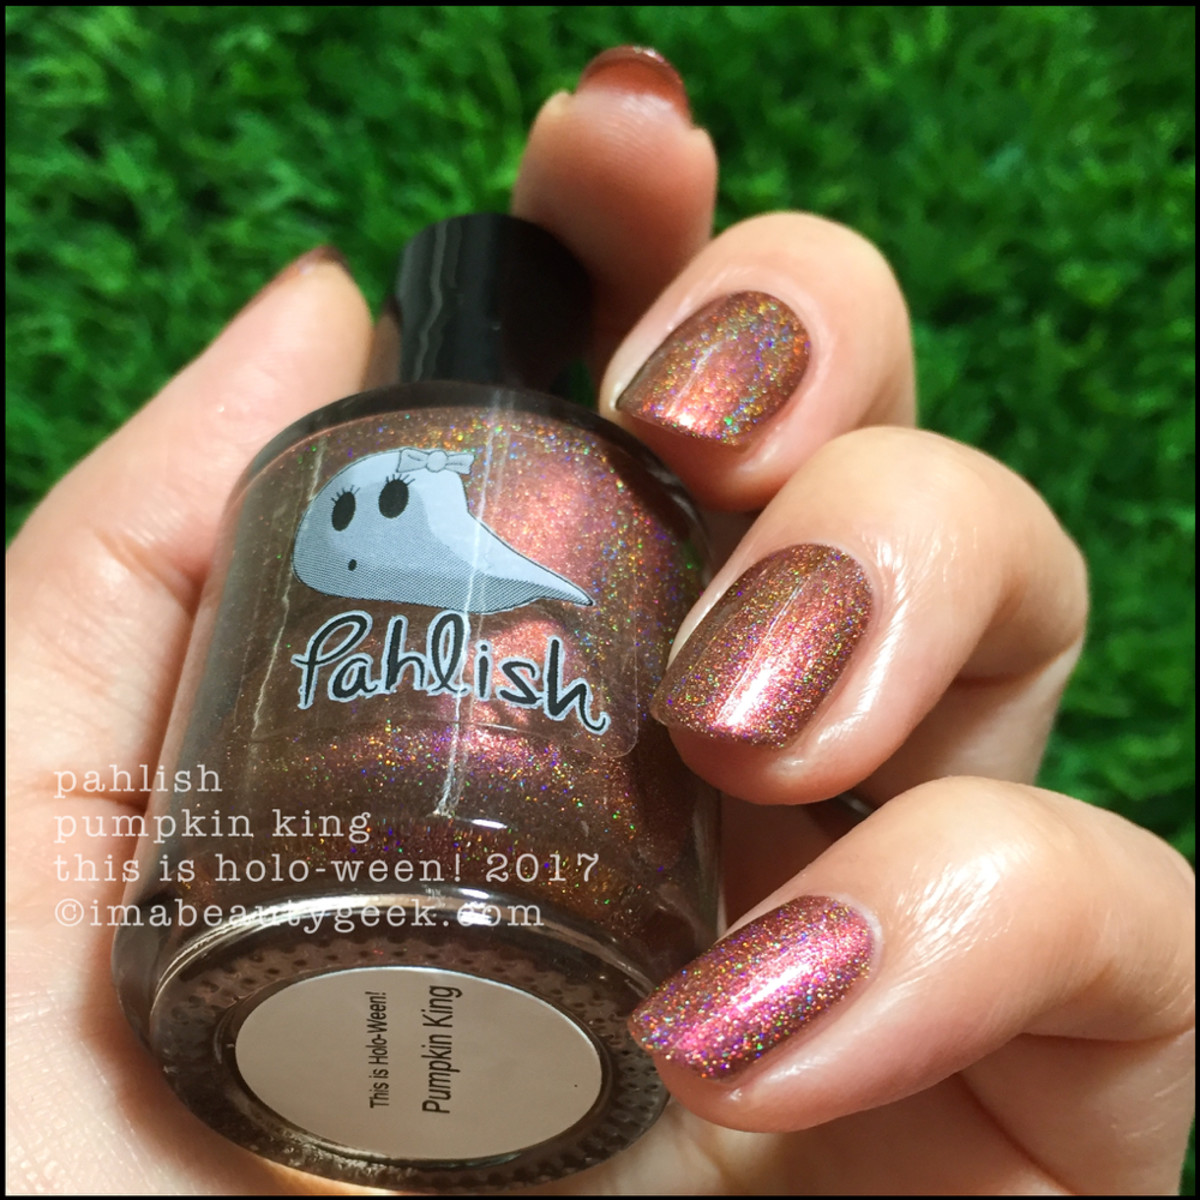 Pahlish Pumpkin King 2 - This is Holo-ween! 2017